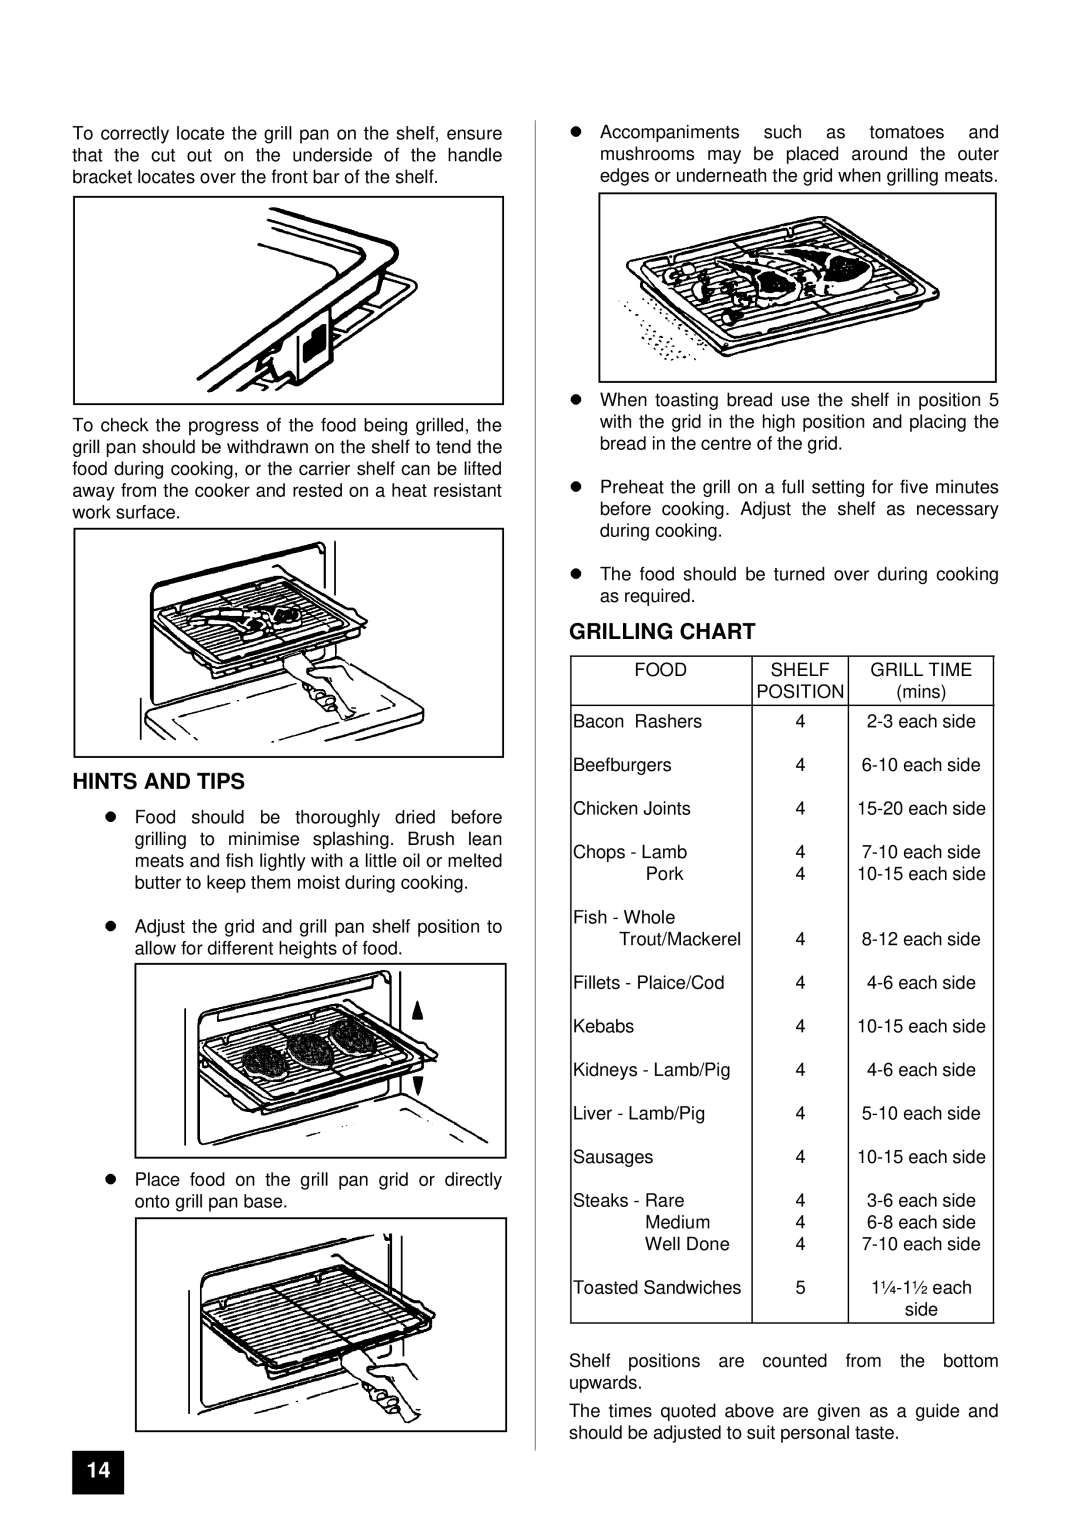 Tricity Bendix SI 251 installation instructions Grilling Chart, Food Shelf Grill Time Position 